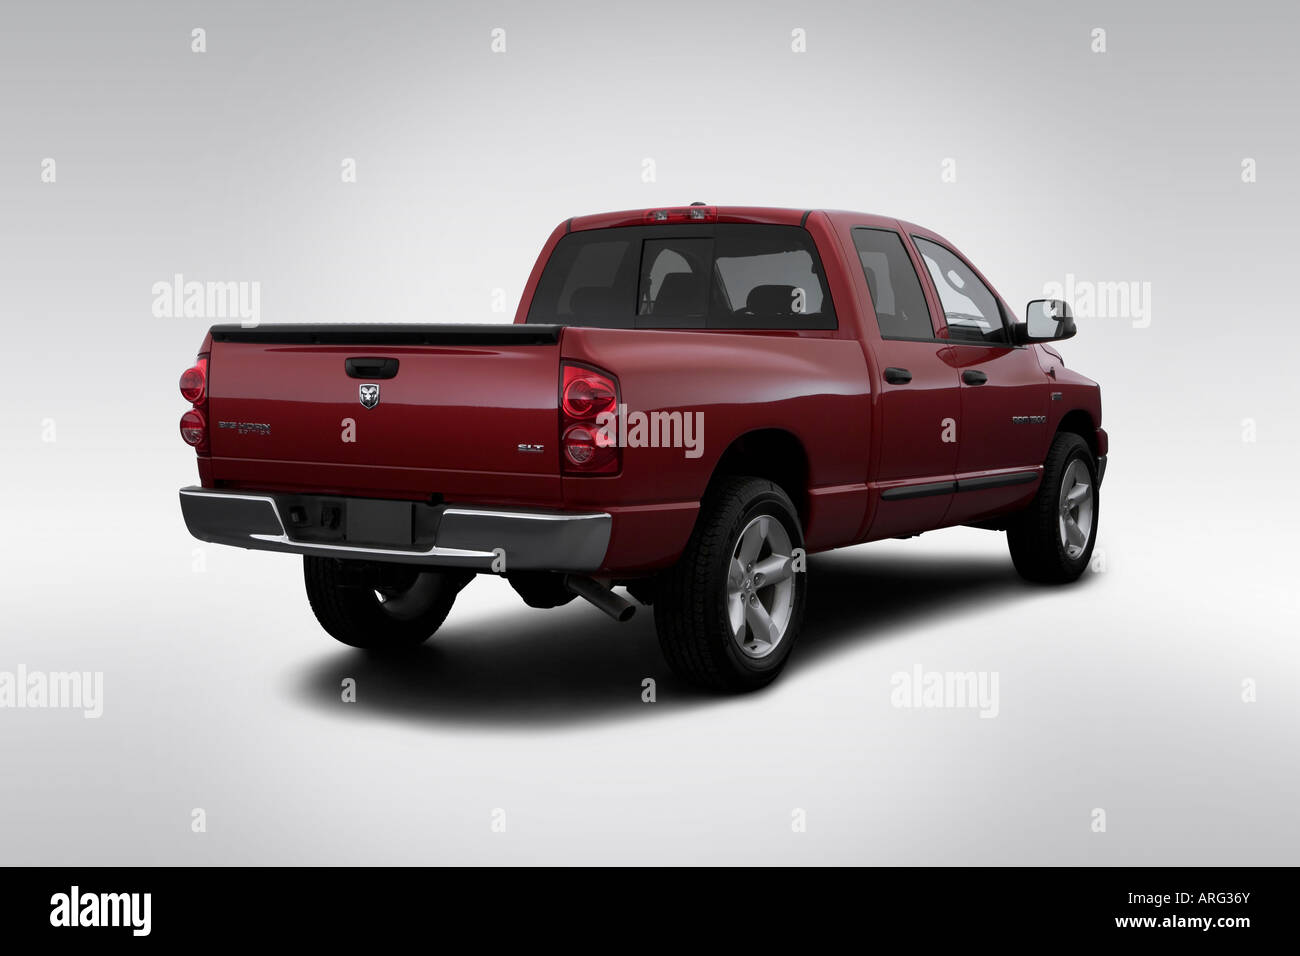 2007 Dodge Ram 1500 SLT in Red - Rear angle view Stock Photo - Alamy